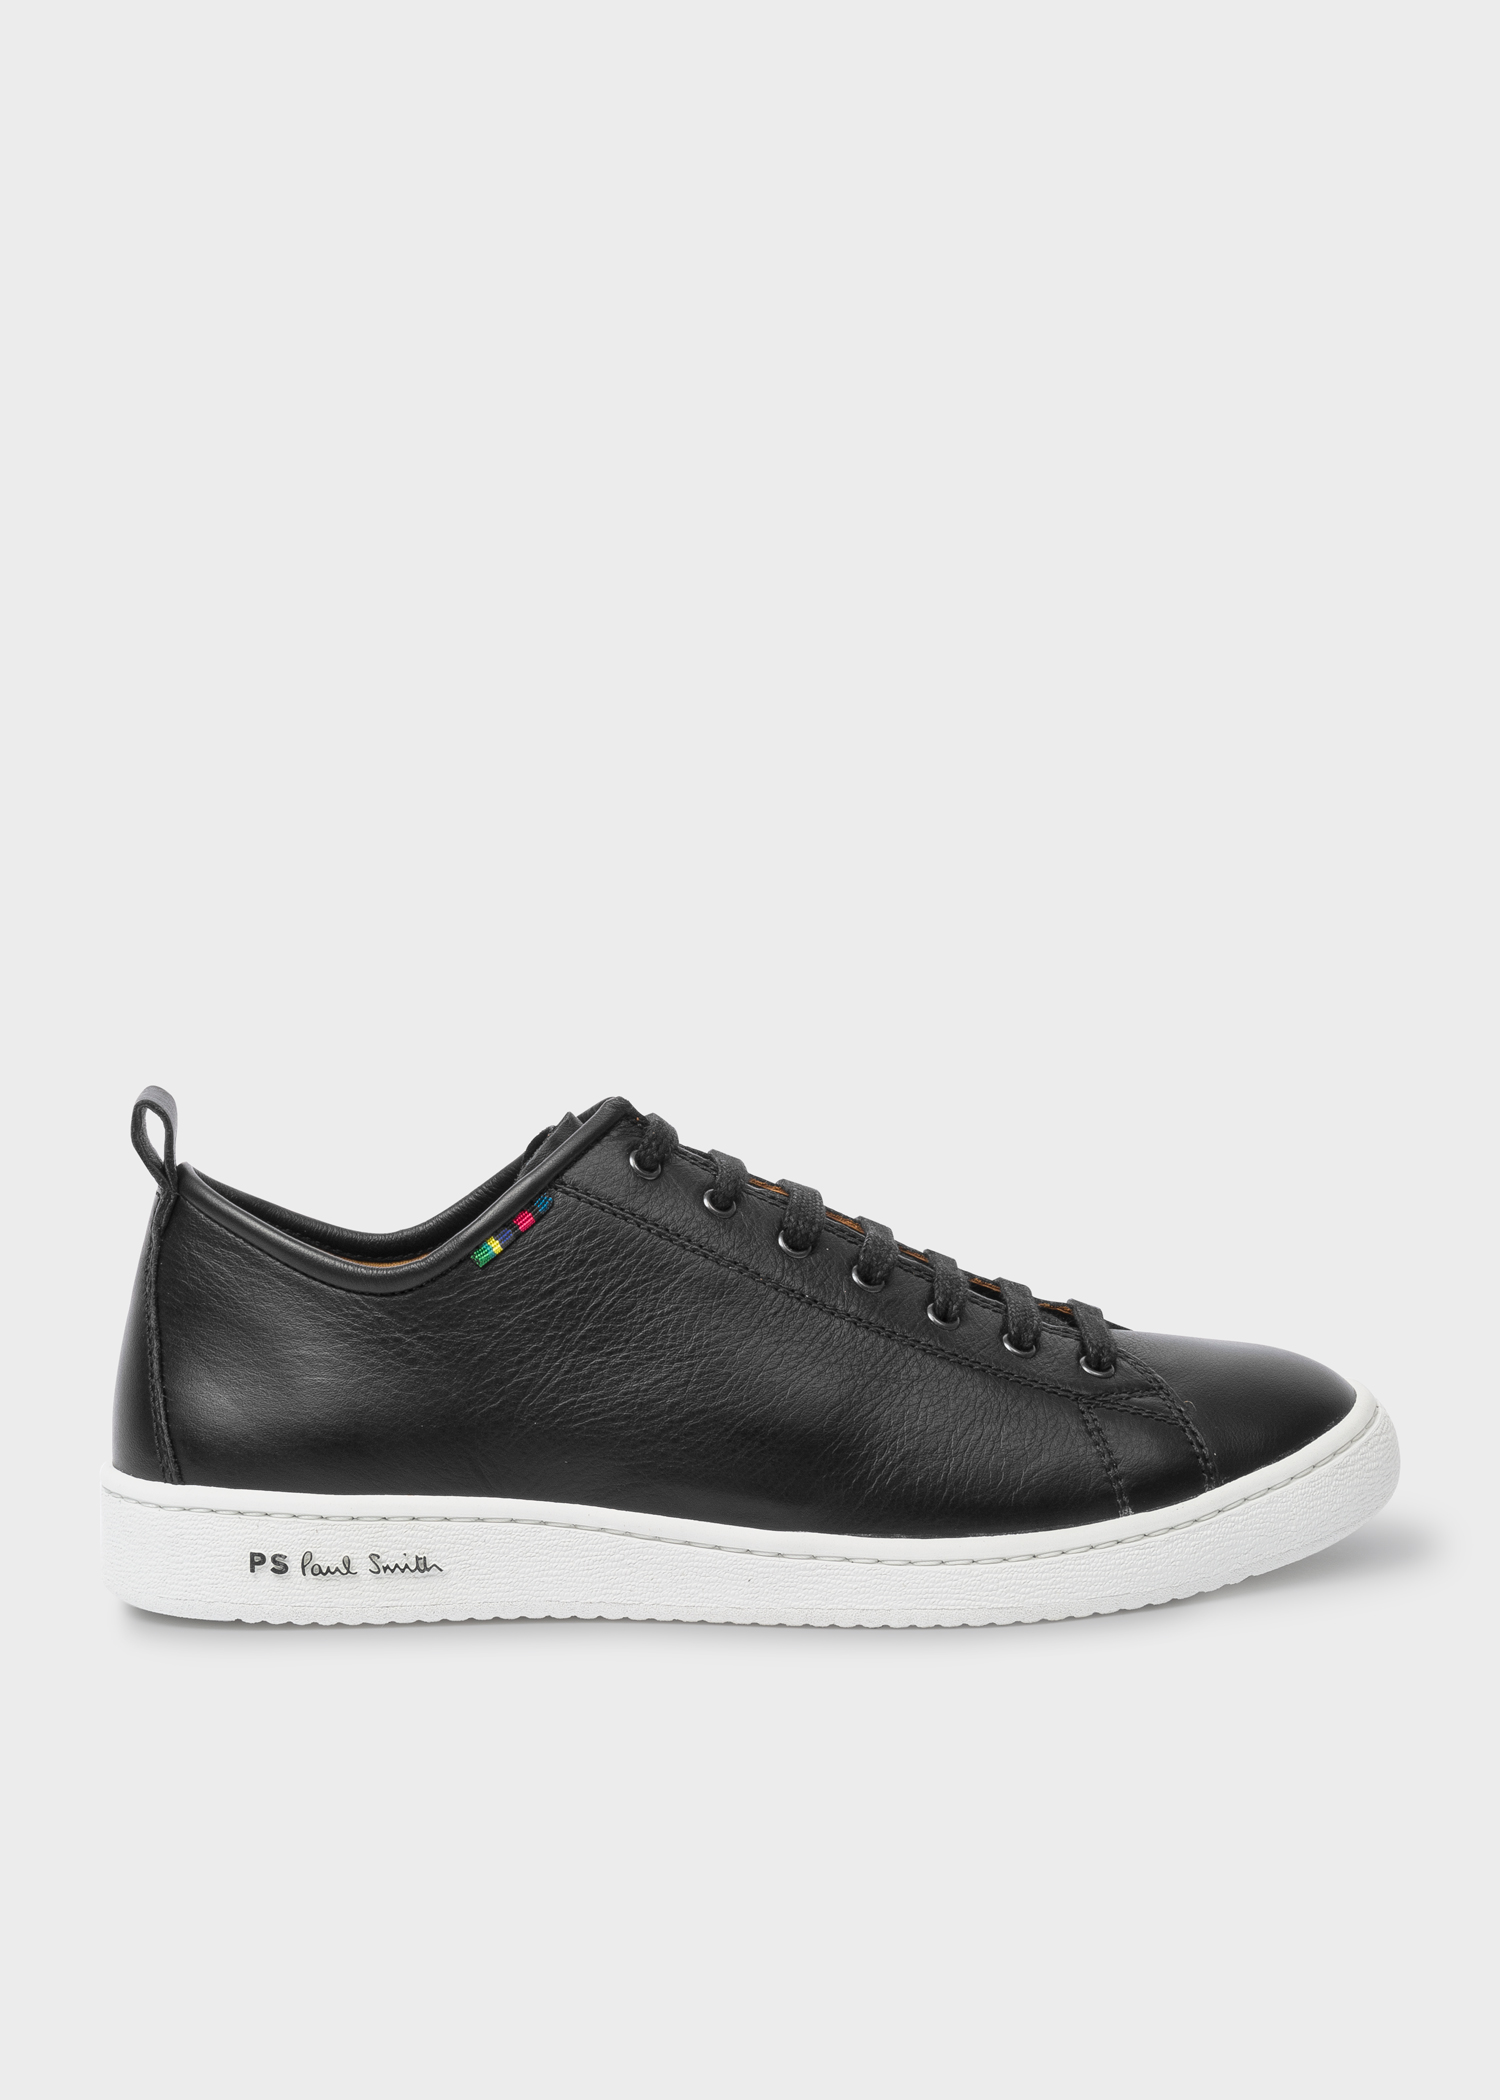 Men's Black Calf Leather 'Miyata' Trainers by Paul Smith